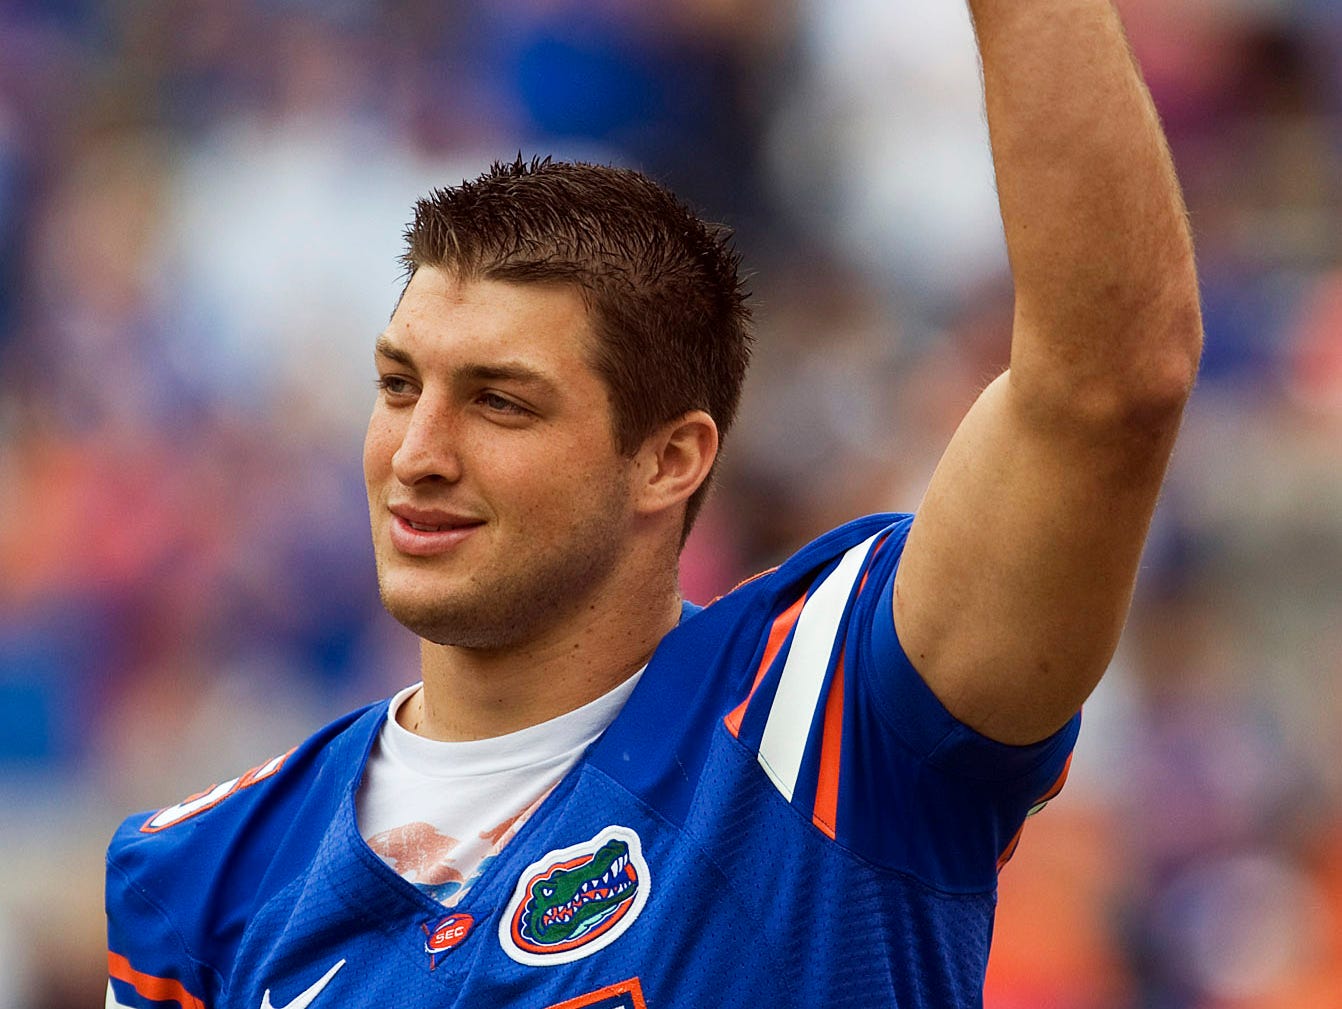 Tim Tebow eyed for open Florida House seat, 'a shoo-in'